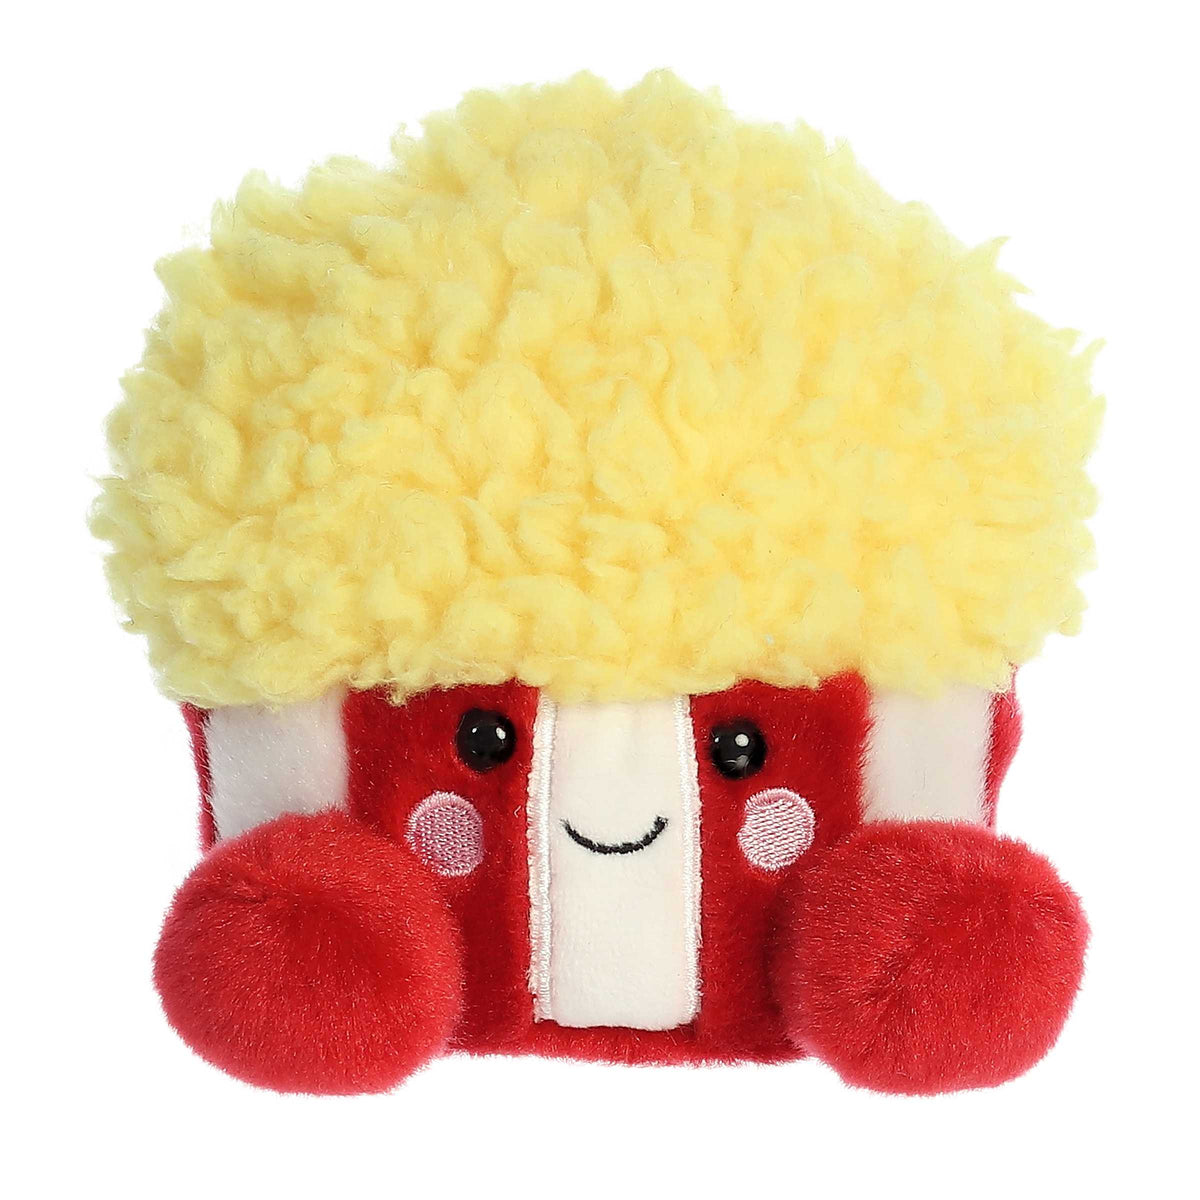 A delicious popcorn plush with a fluffy yellow top and a traditional red and white movie theater bucket